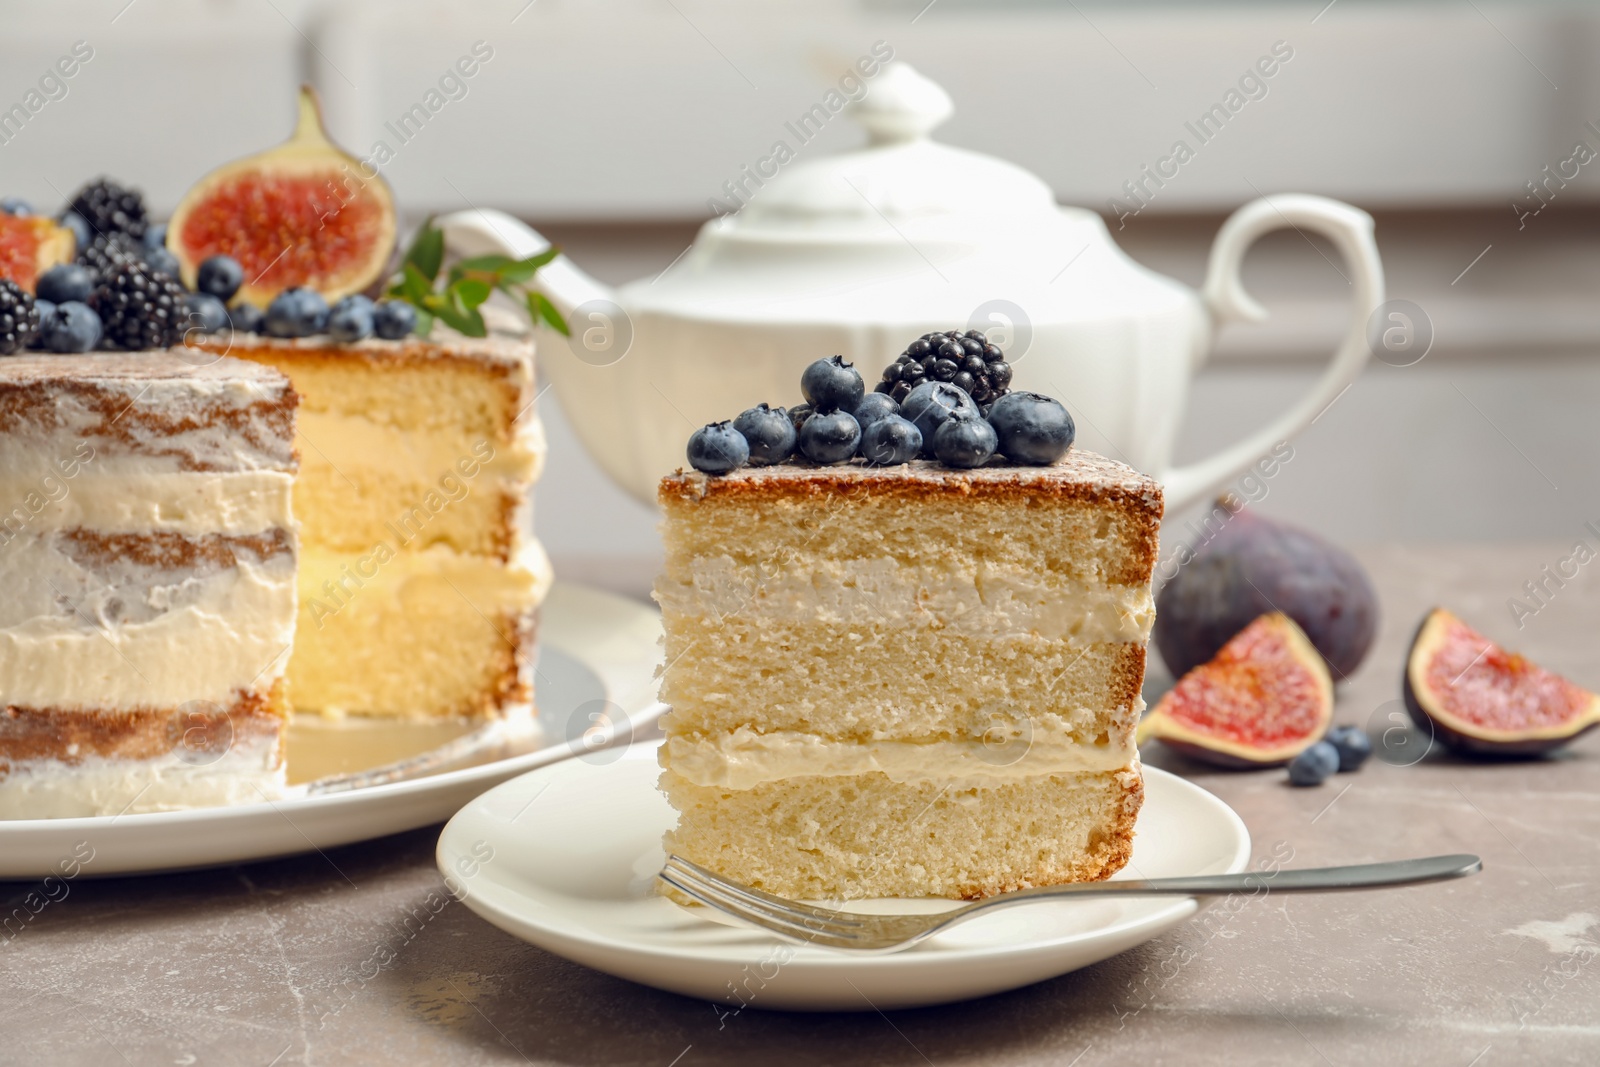 Photo of Piece of delicious homemade cake with fresh berries served on table